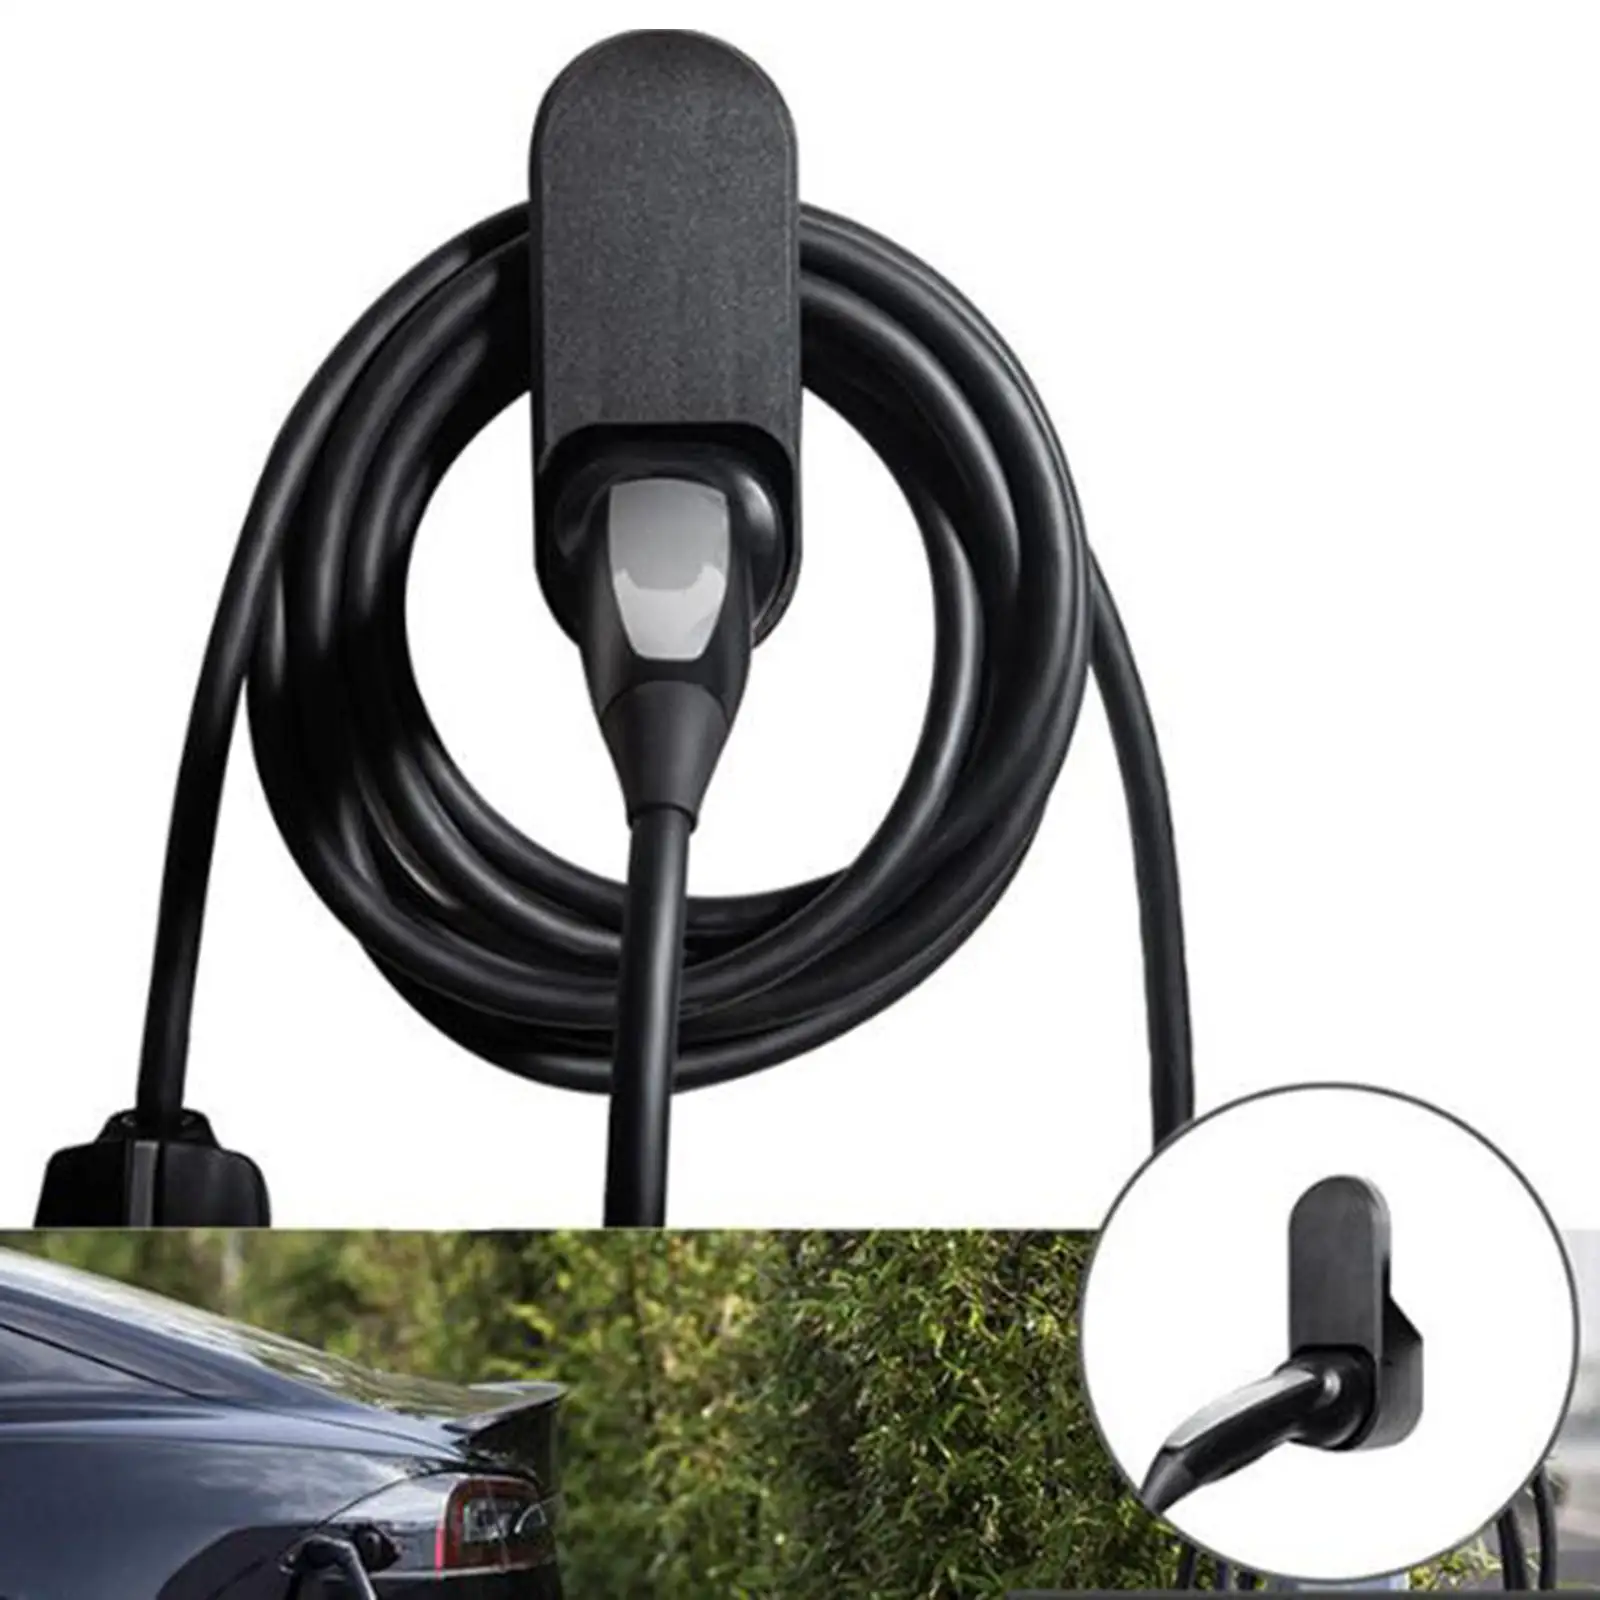 Charger Wall Holder Mount Portable Cord Holder Cable Organizer for Tesla Model 3 Y S x